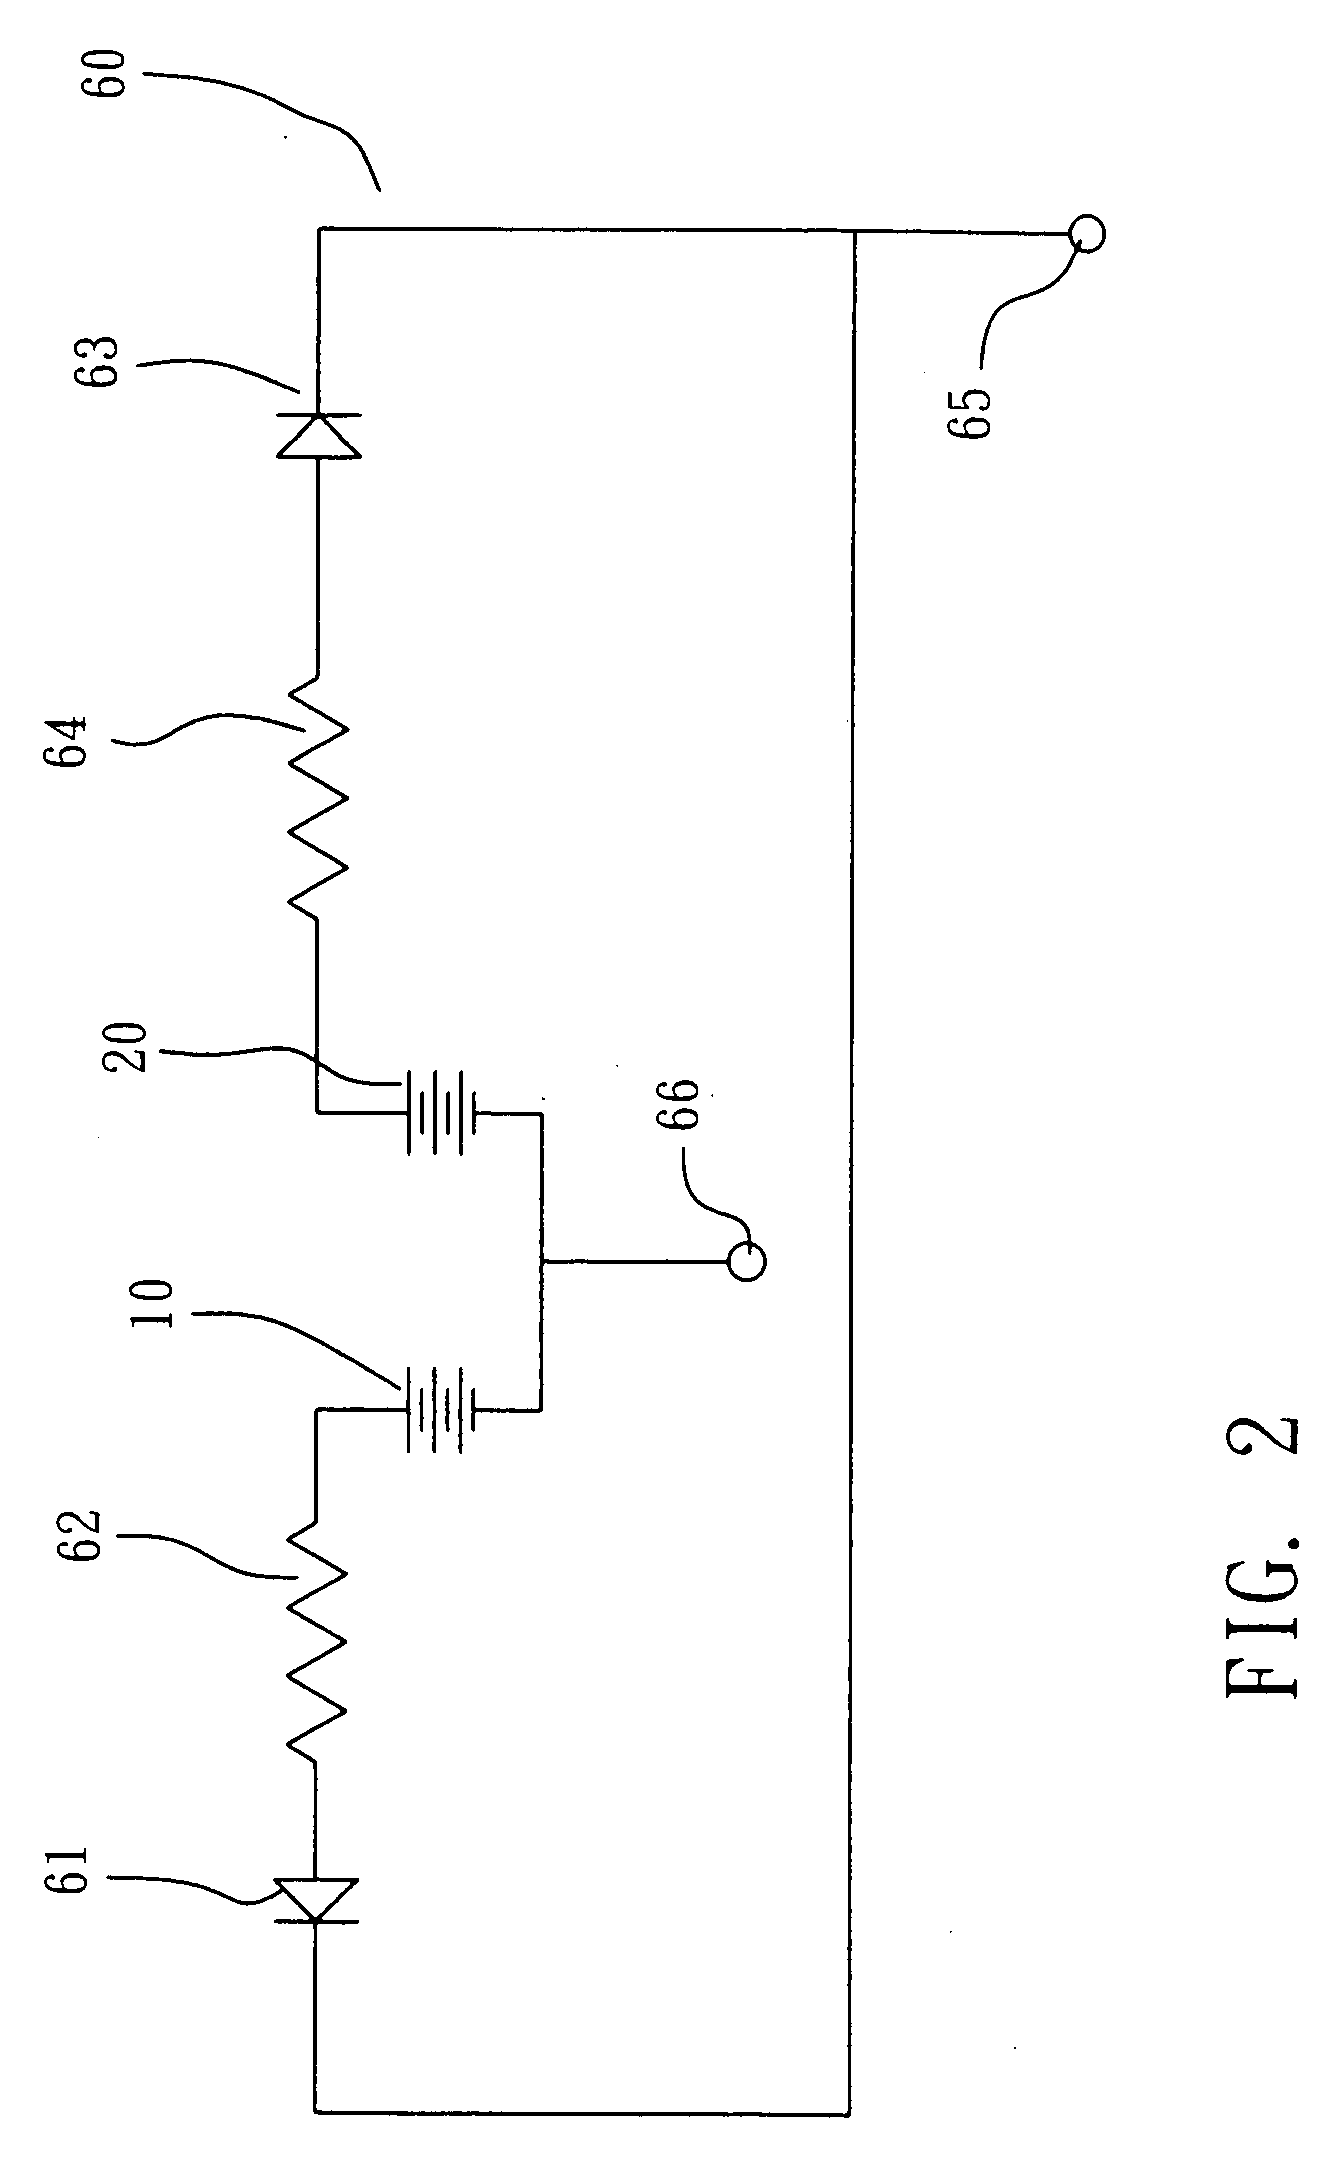 Hybrid battery module and its manufacturing, charging and discharging method